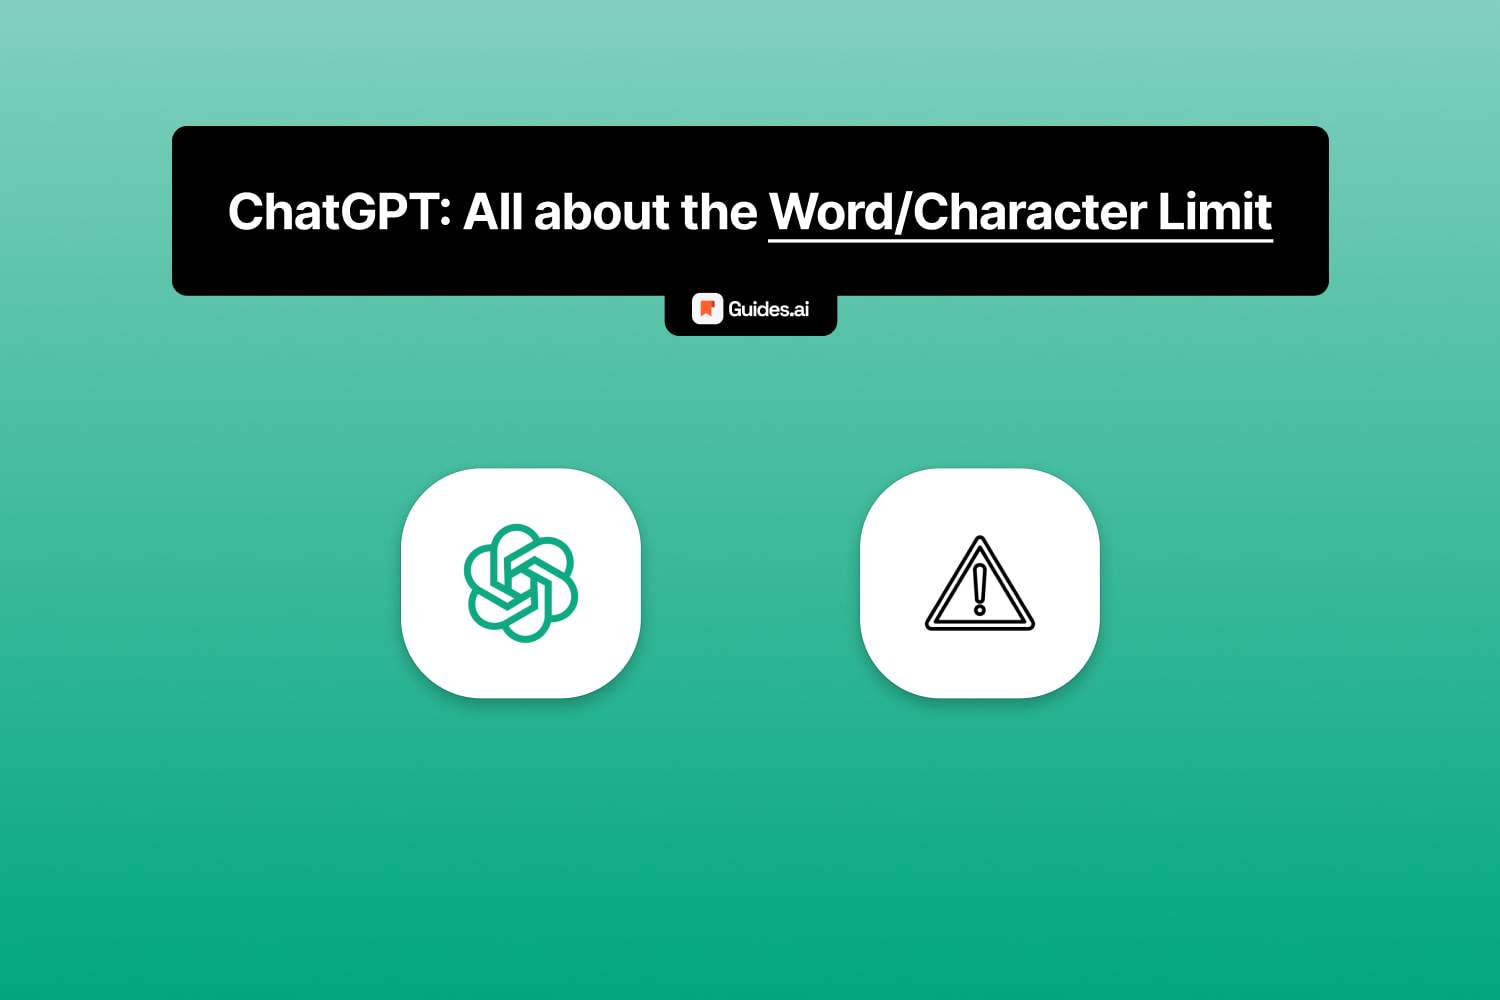 Everything about ChatGPT's character limit